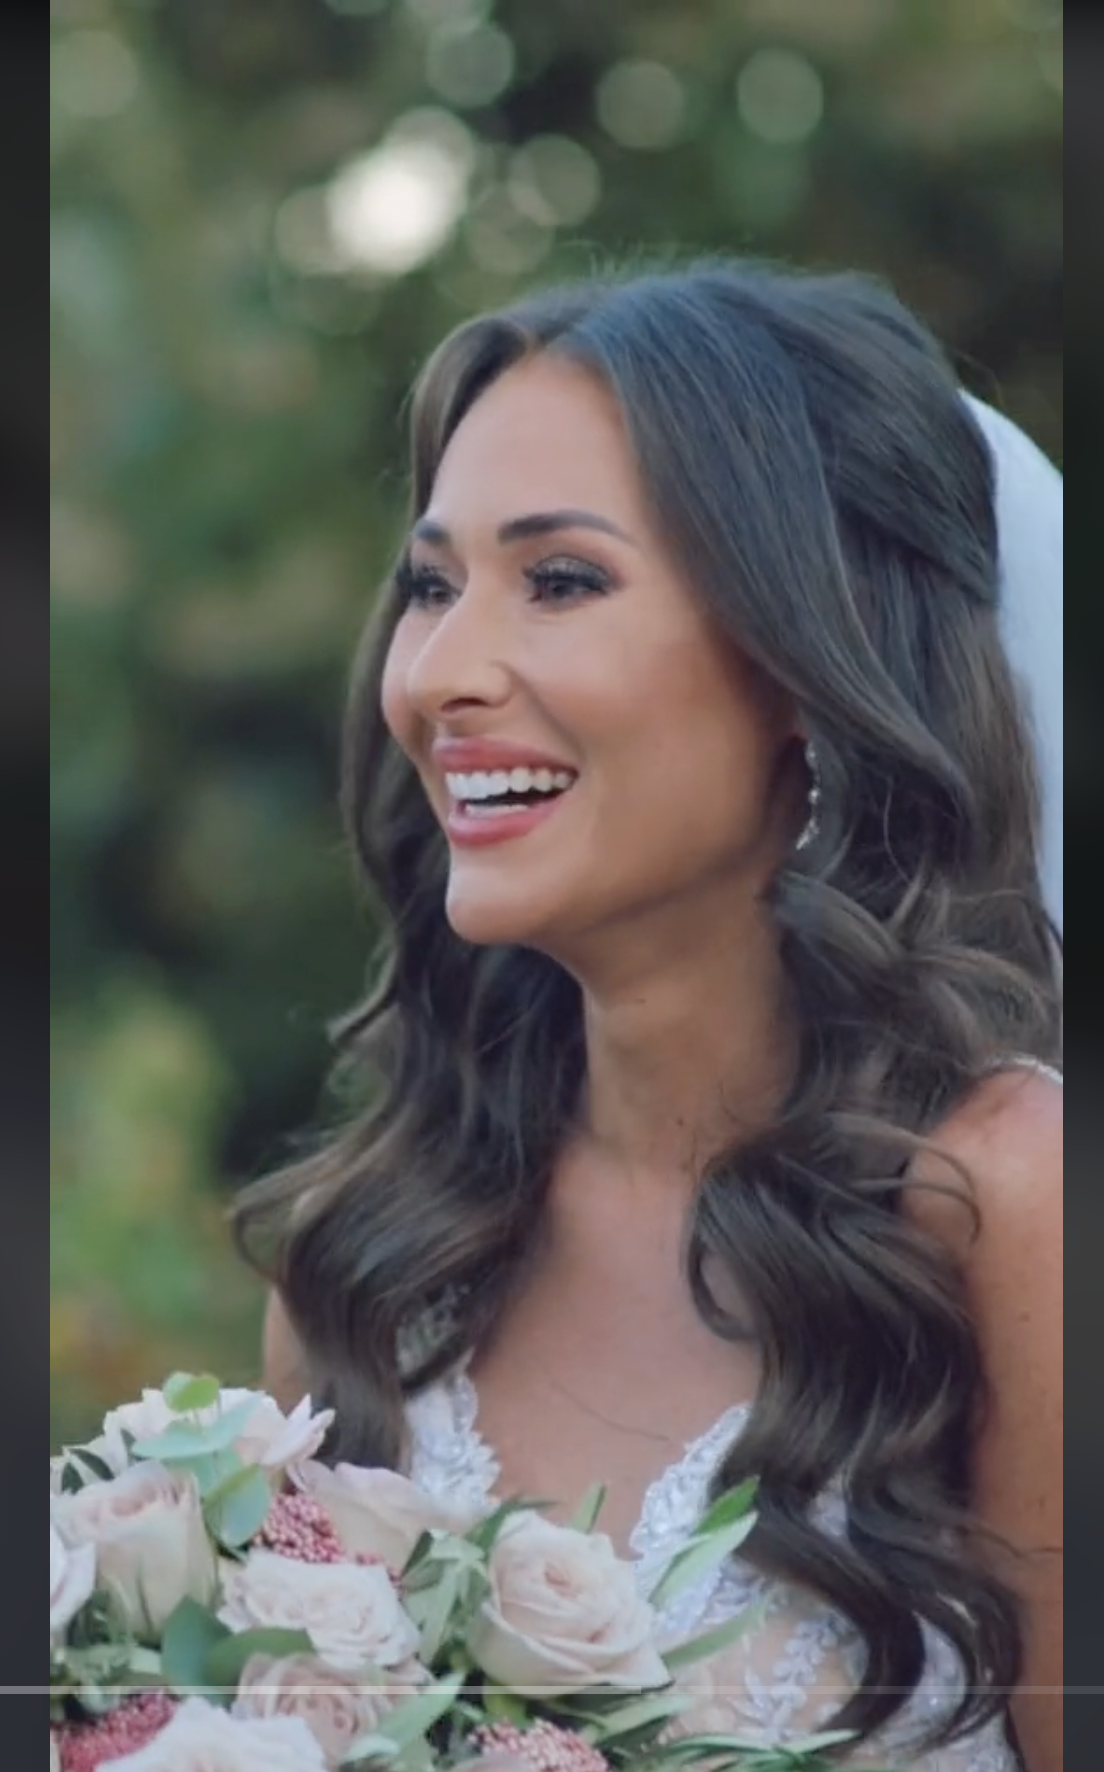 Becky Jefferies on her wedding day, as seen in a video dated May 5, 2022 | Source: tiktok.com/@jetsetbecks